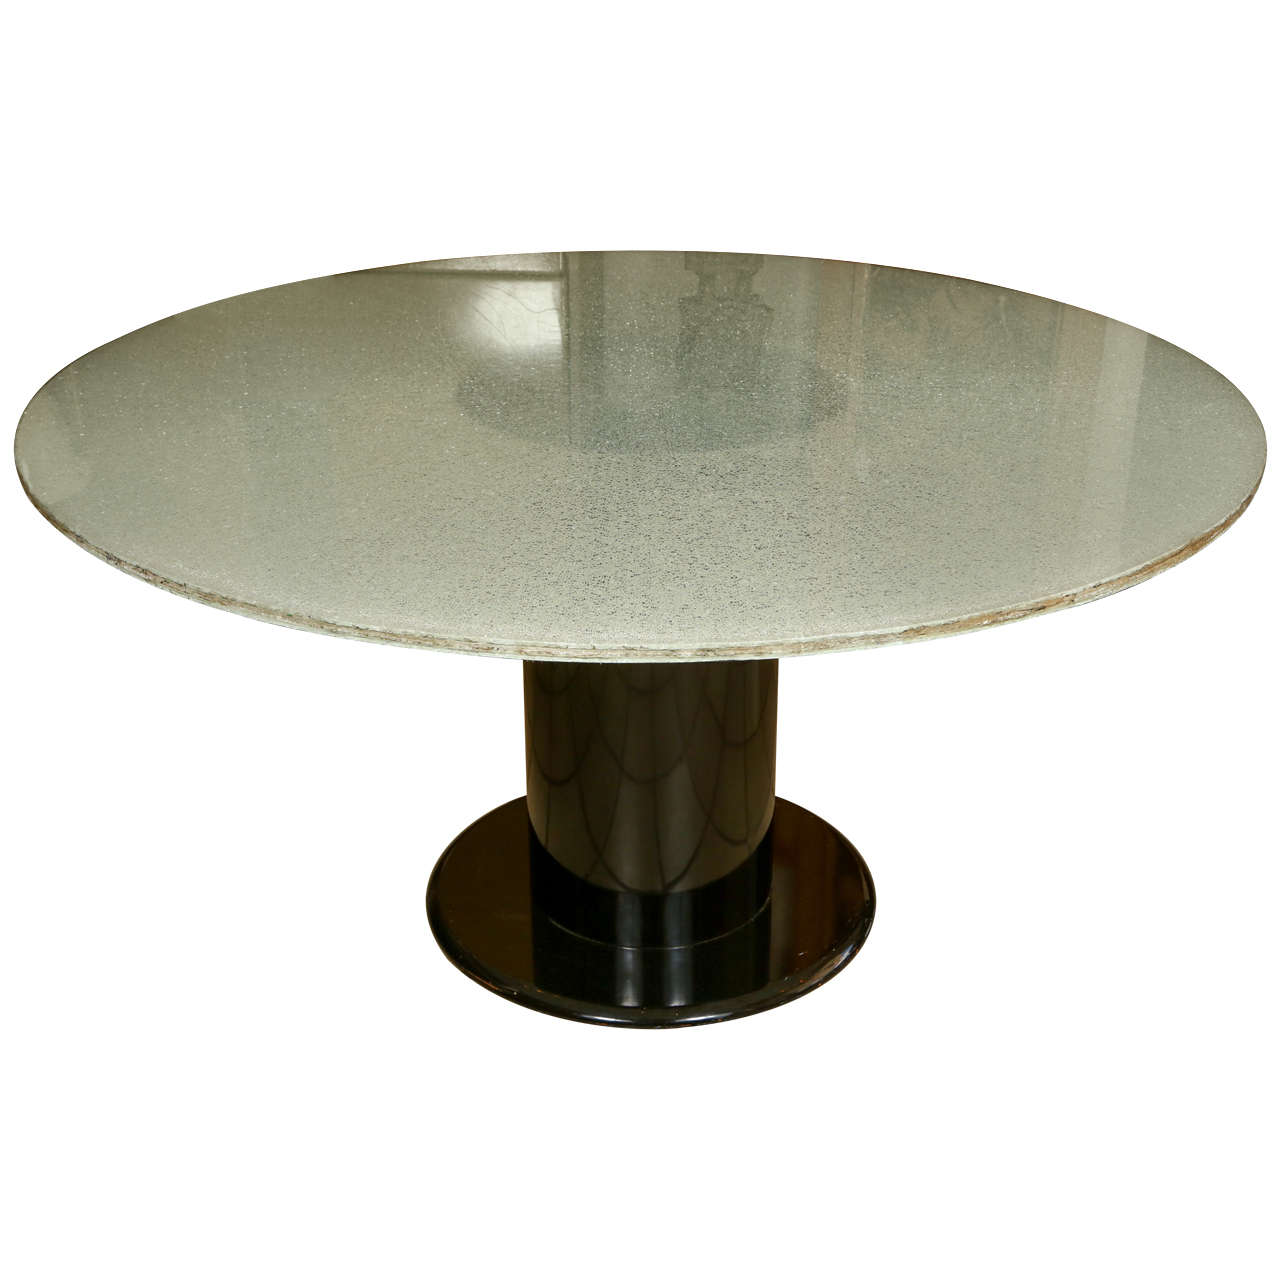 Interesting Round Dining Table with a Crackled Acrylic Top on a Blackwood Base